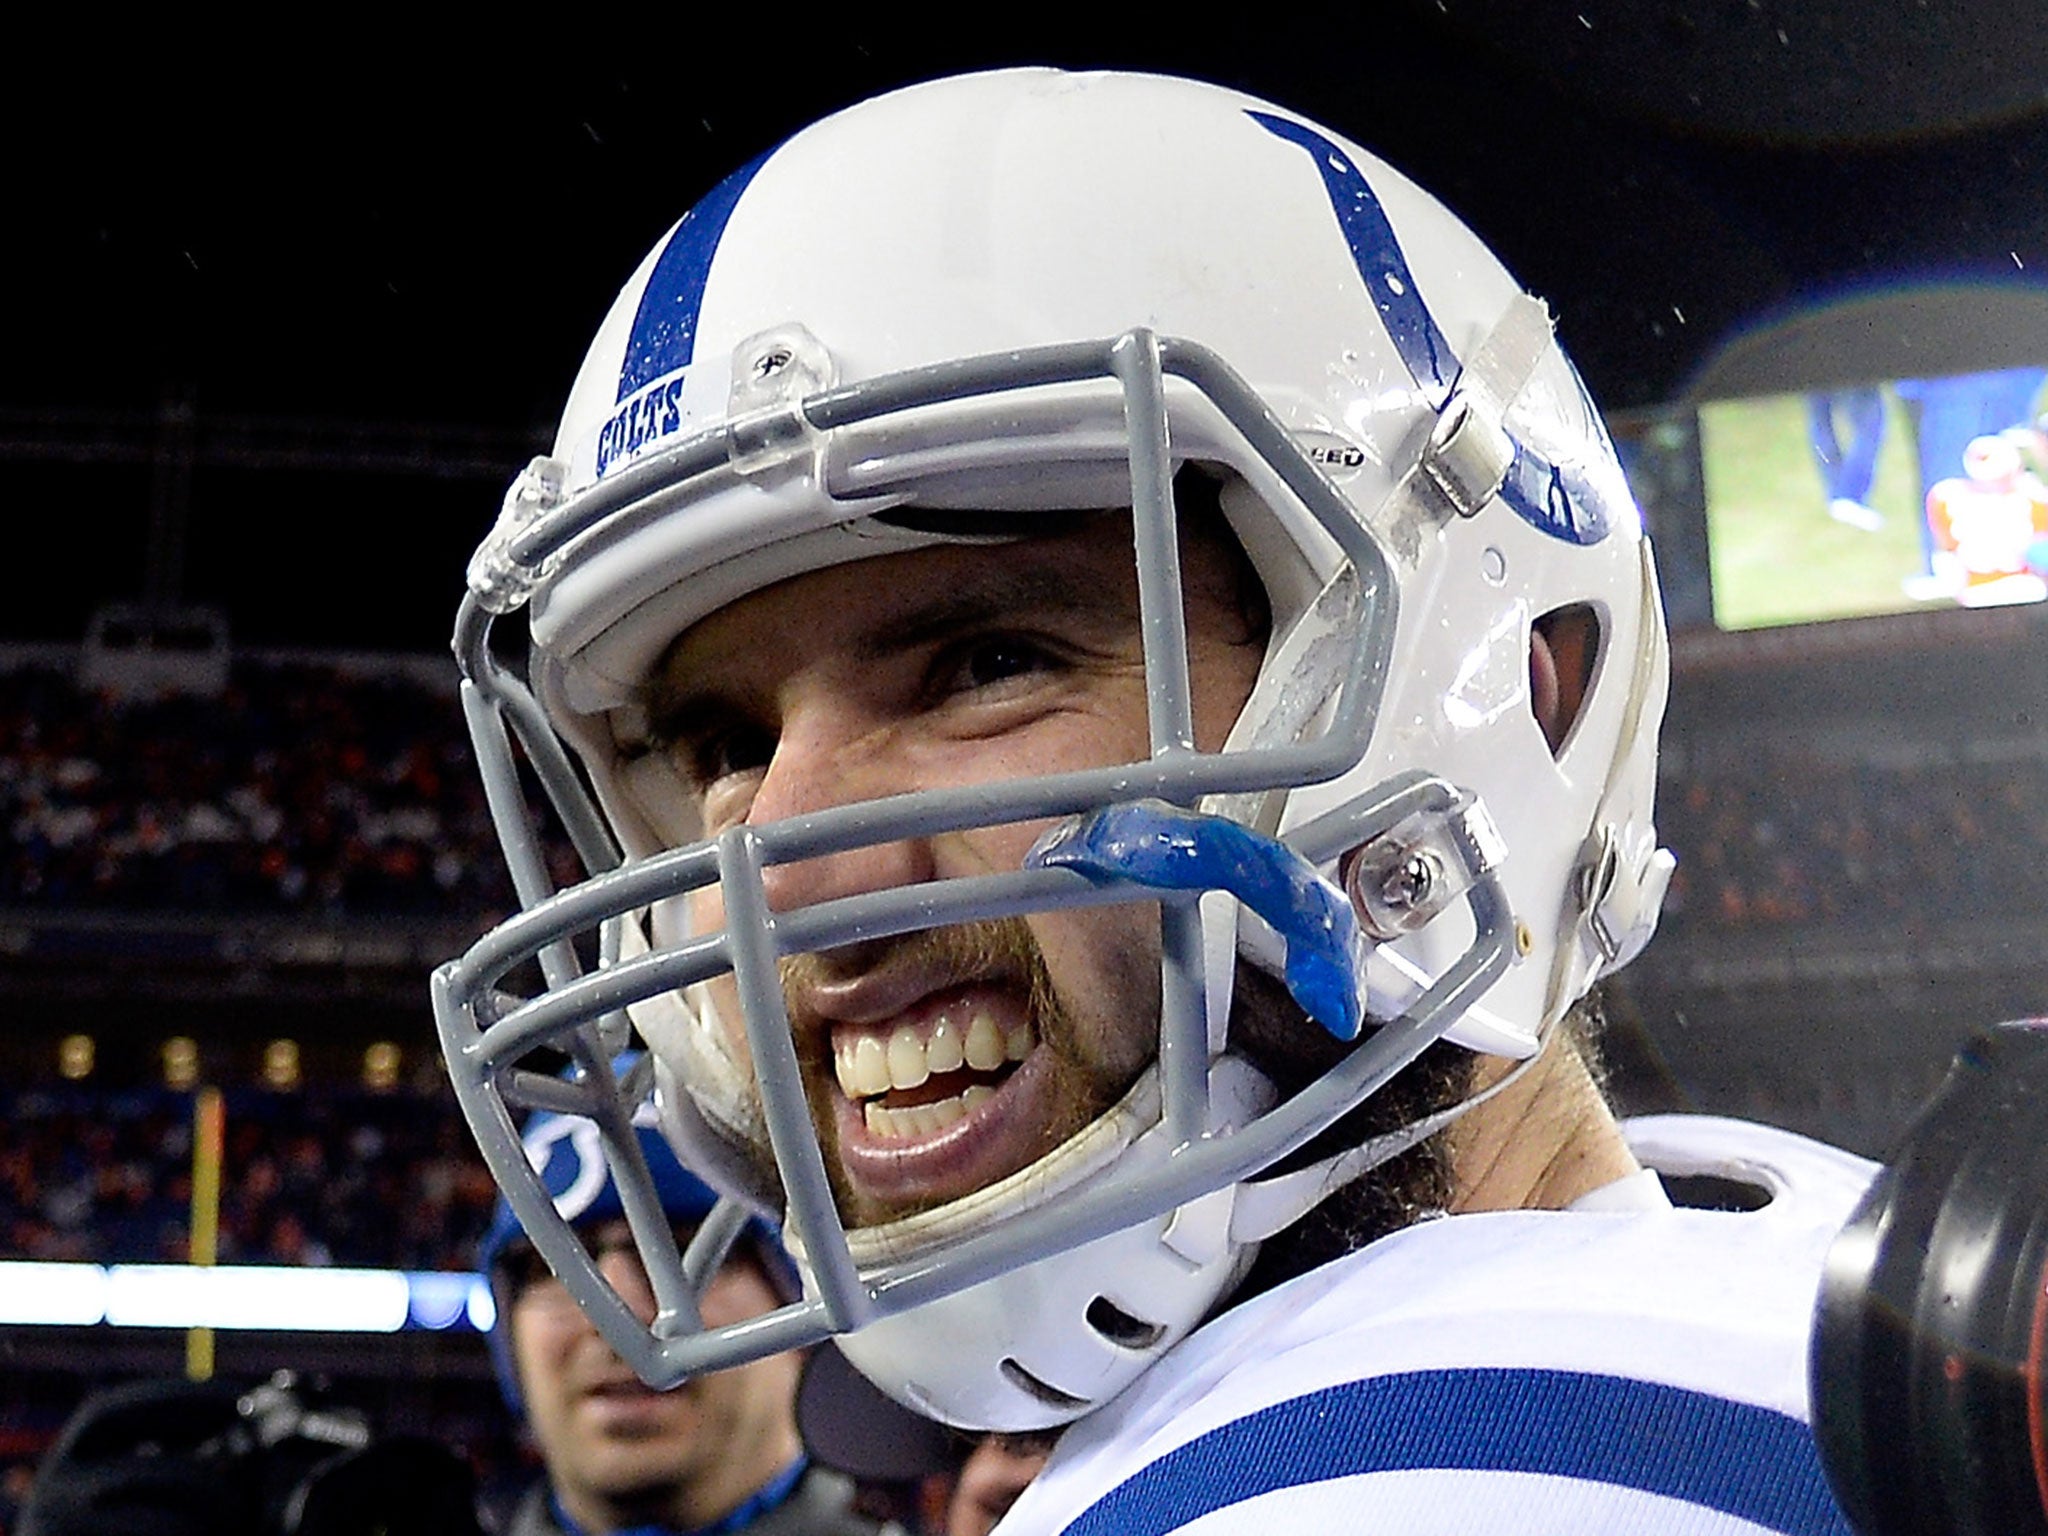 Colts' quarterback Andrew Luck